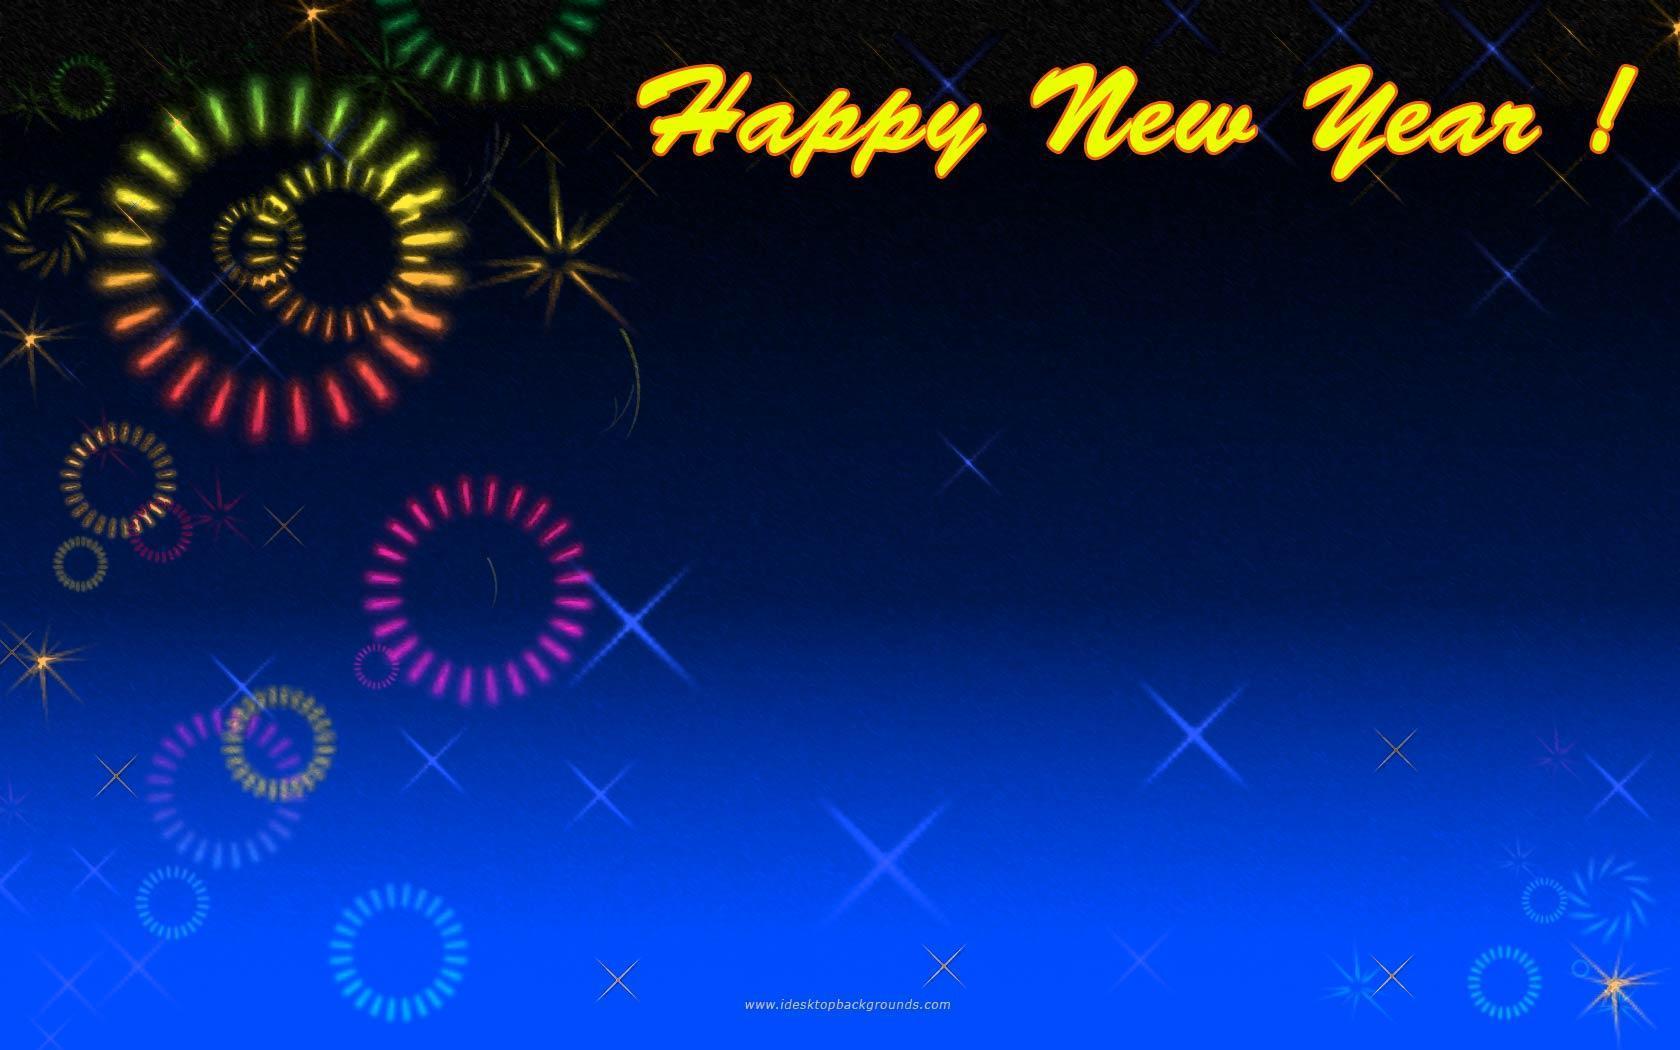 Happy New Year Backgrounds - Wallpaper Cave